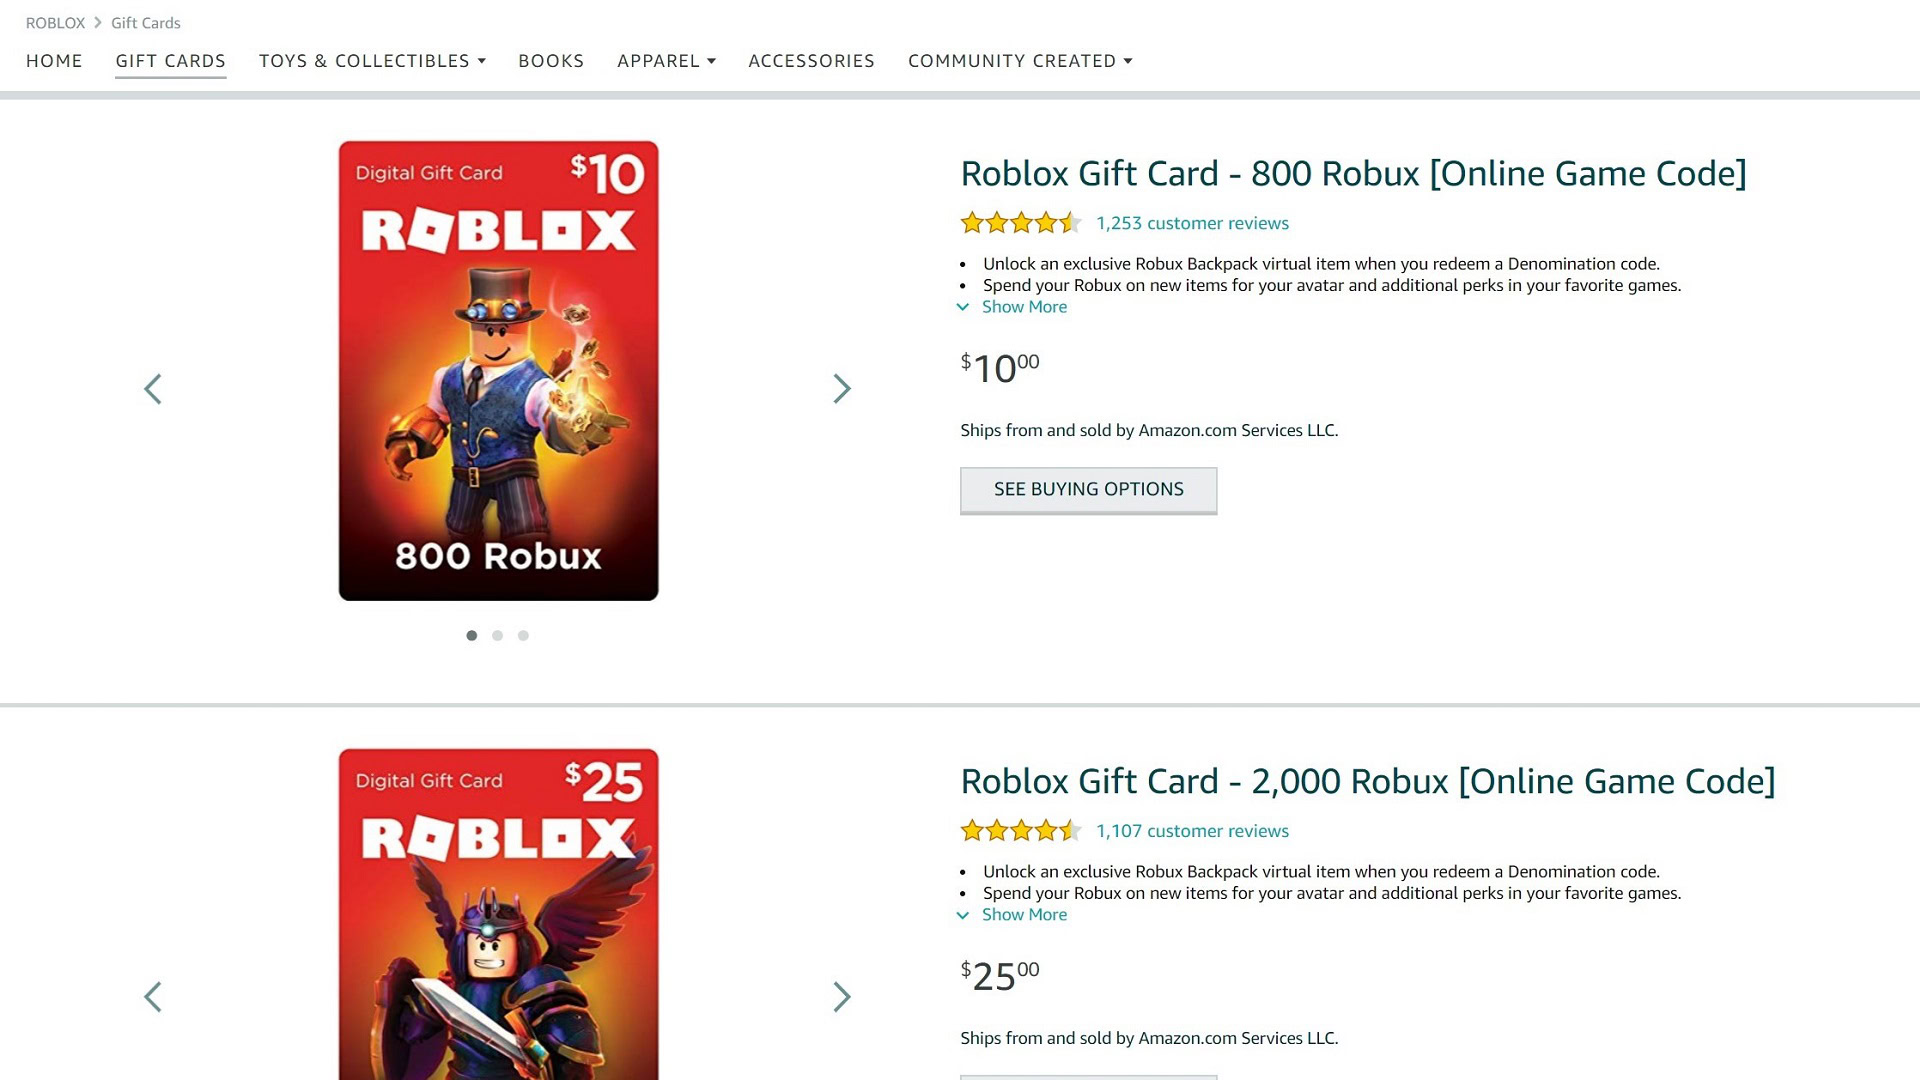 How To Activate Roblox Gift Card (Steps To Activate Your Roblox